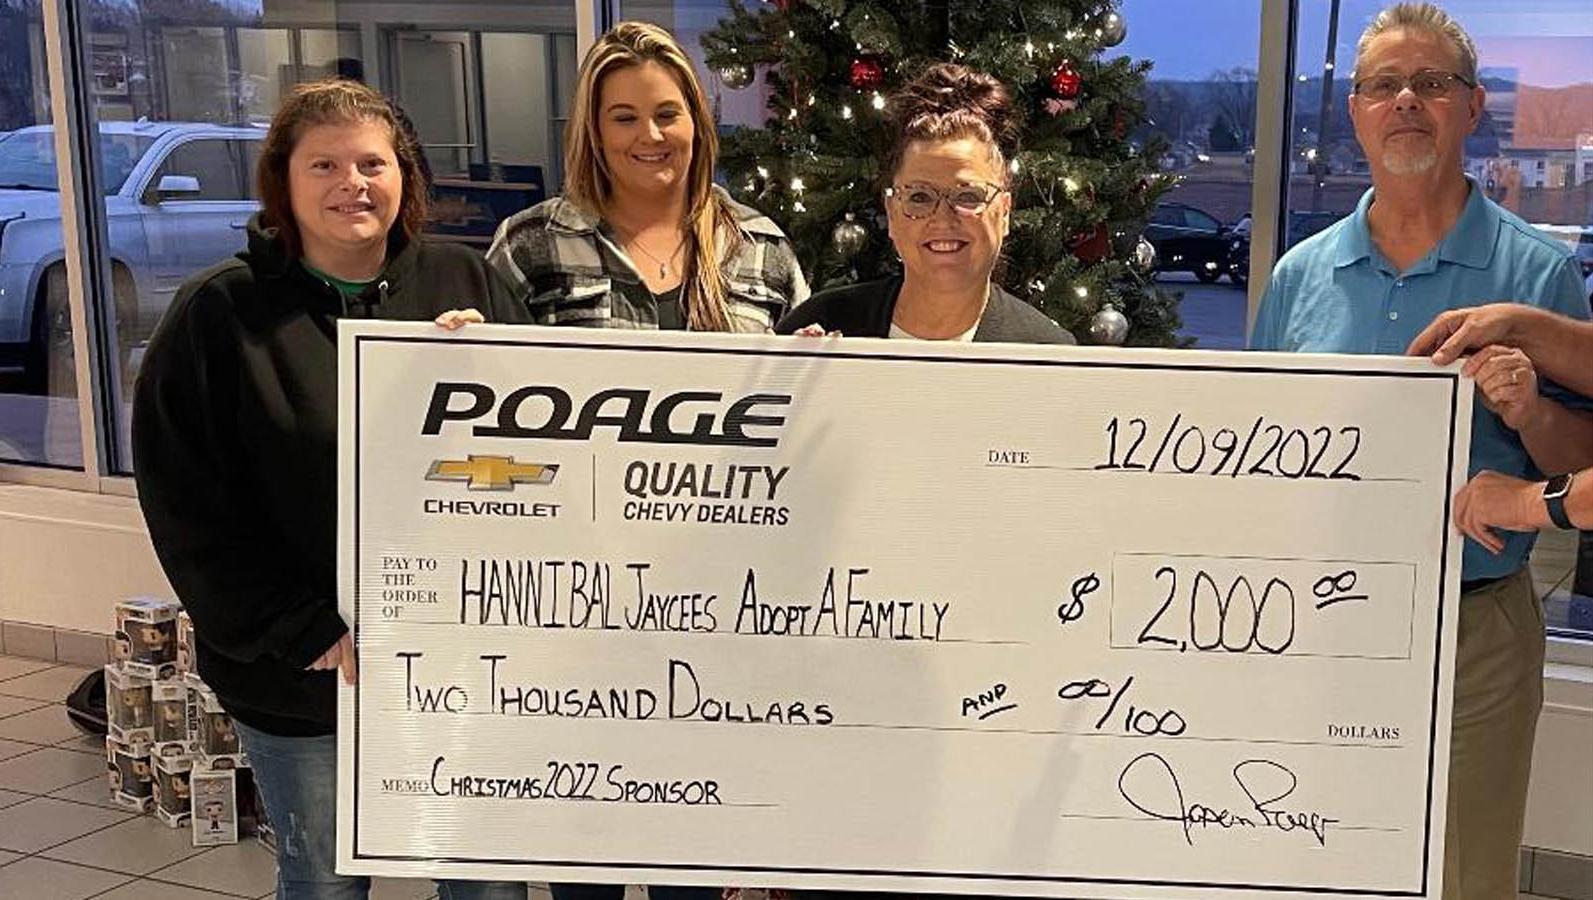 we donated $2000 amount to Hannibal Jaycees Adopt A Family